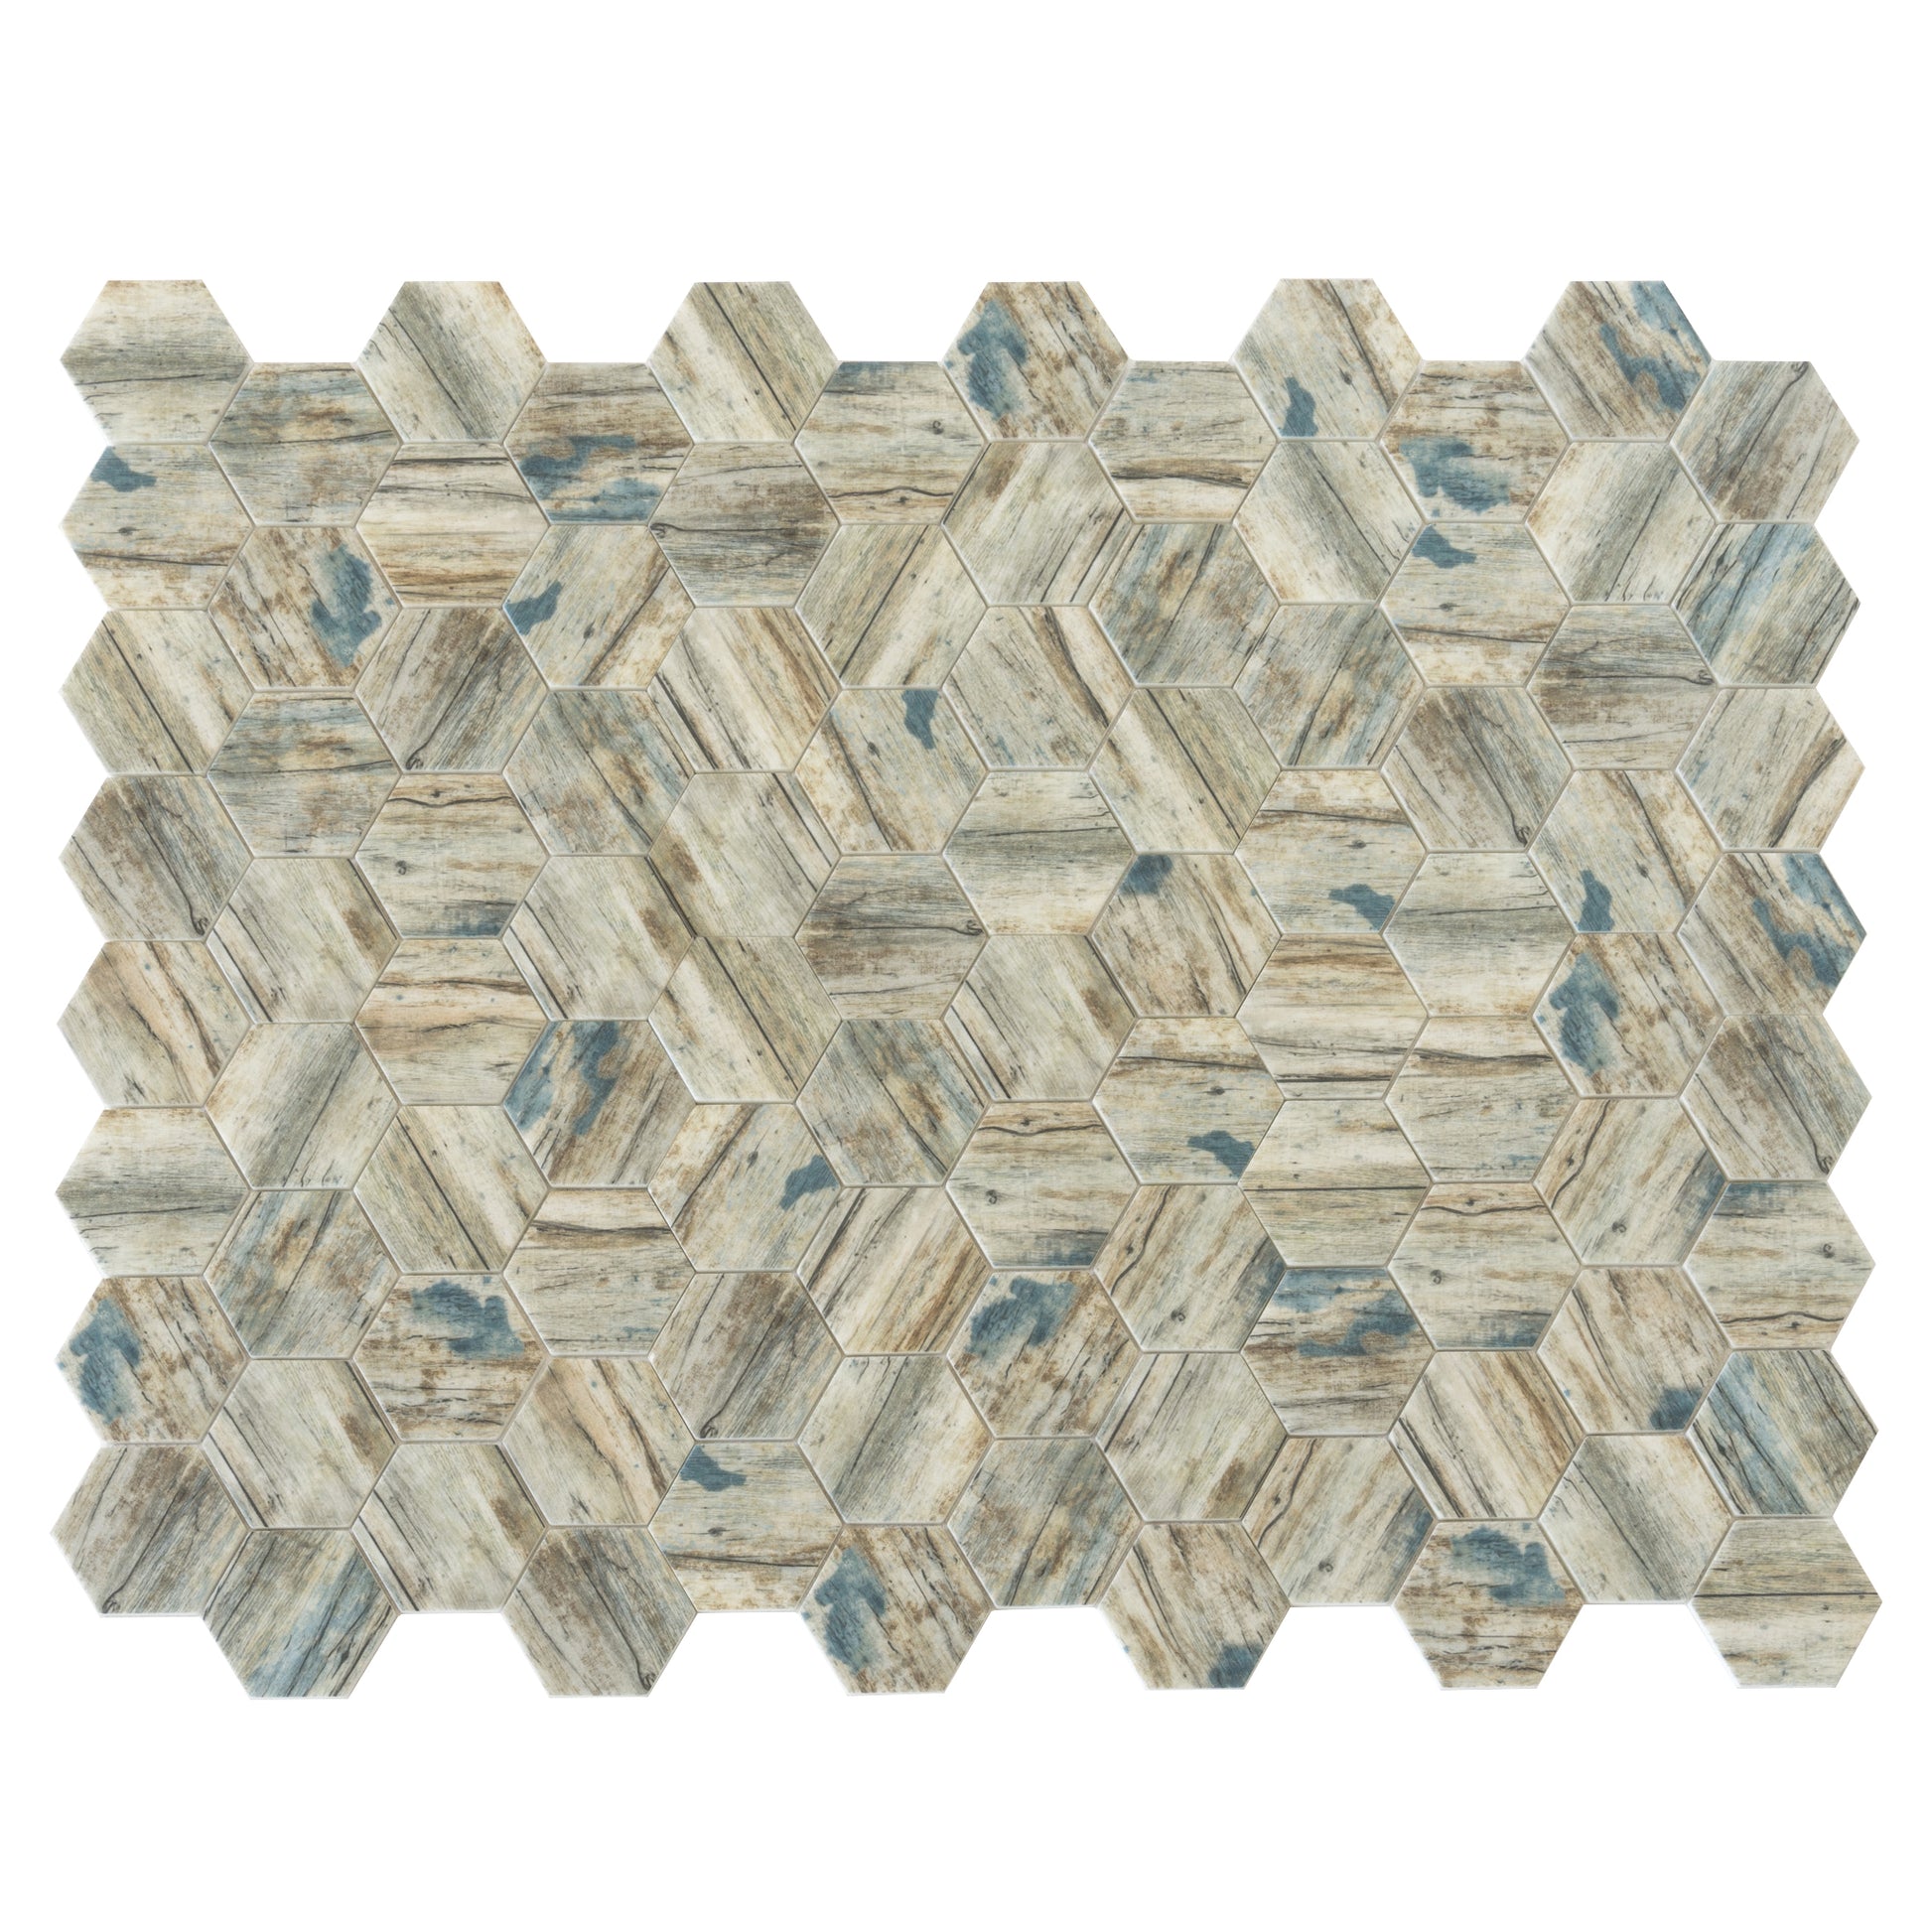 10x12 Blue and Beige Mosaic Tile